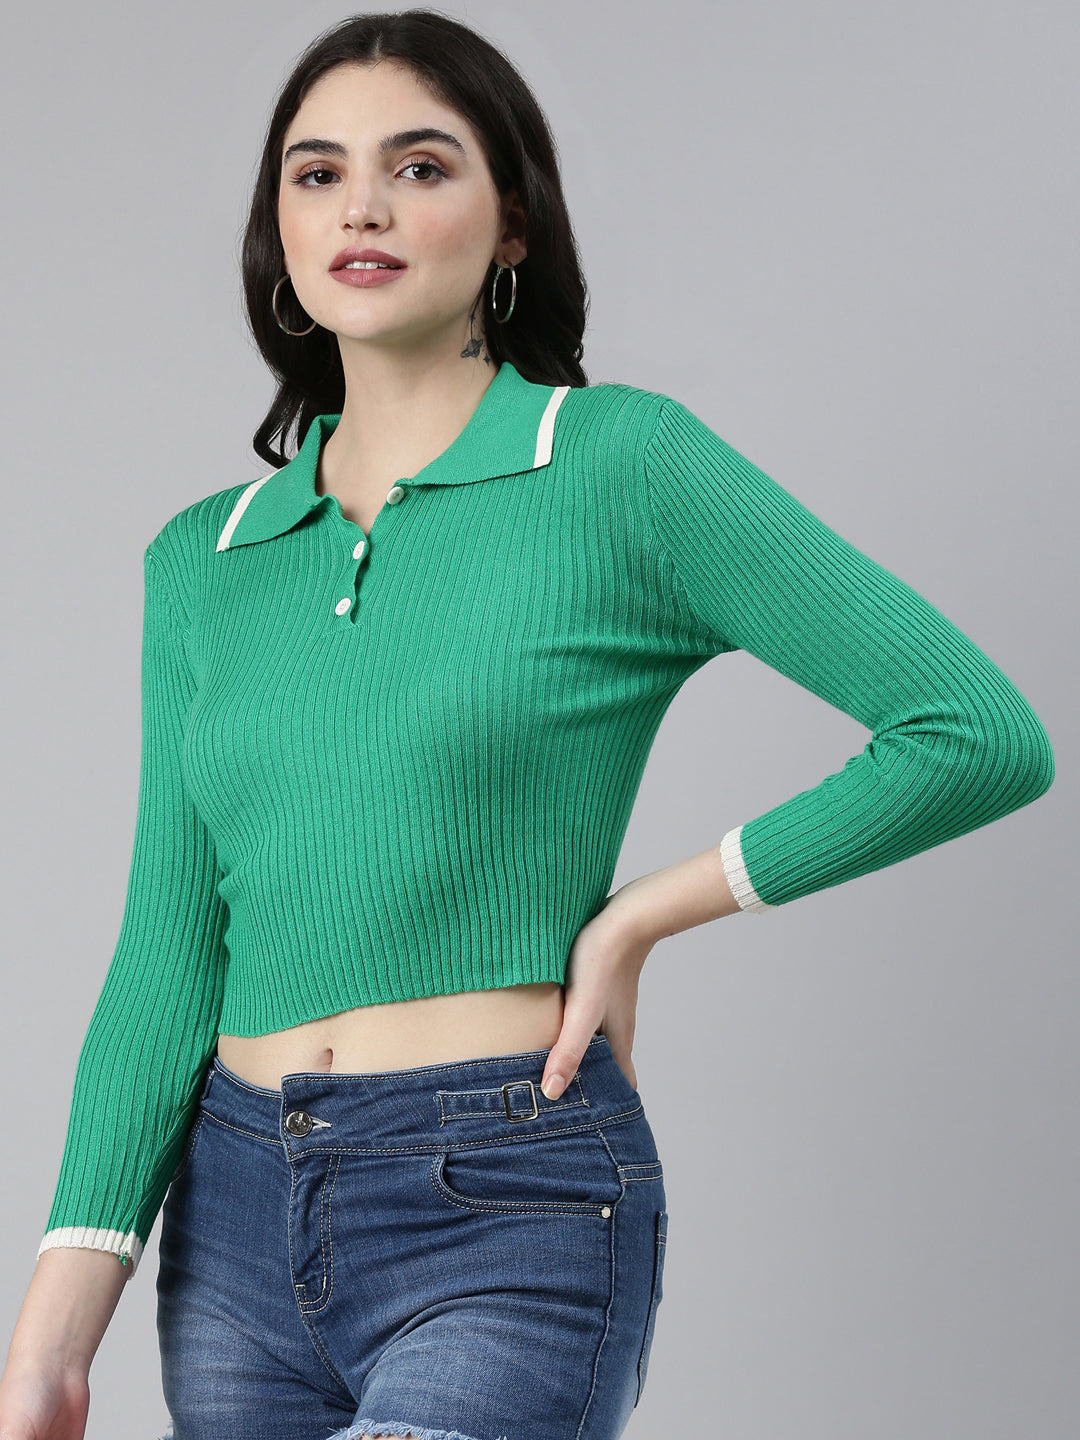 Above the Keyboard Collar Solid Regular Sleeves Fitted Green Crop Top